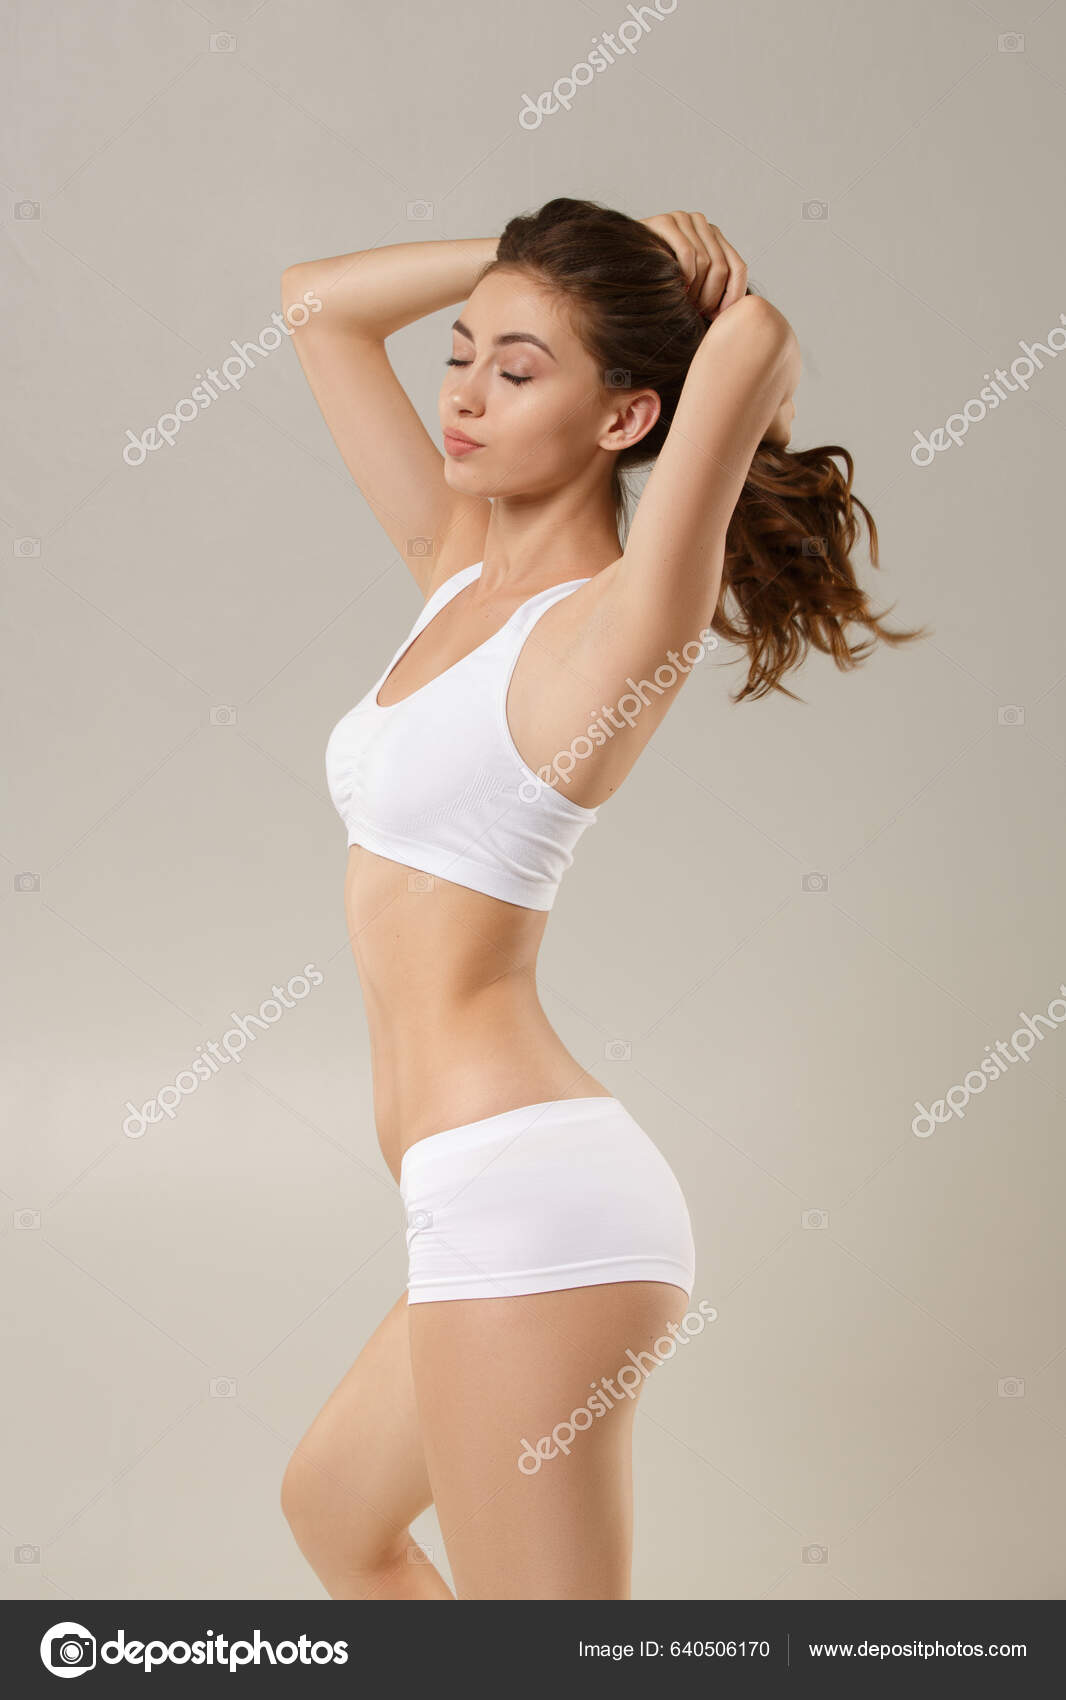 Feeling Beautiful Woman Natural Slim Tanned Body Underwear Plays Hair Stock  Photo by ©panin.sergey.me.com 640506170